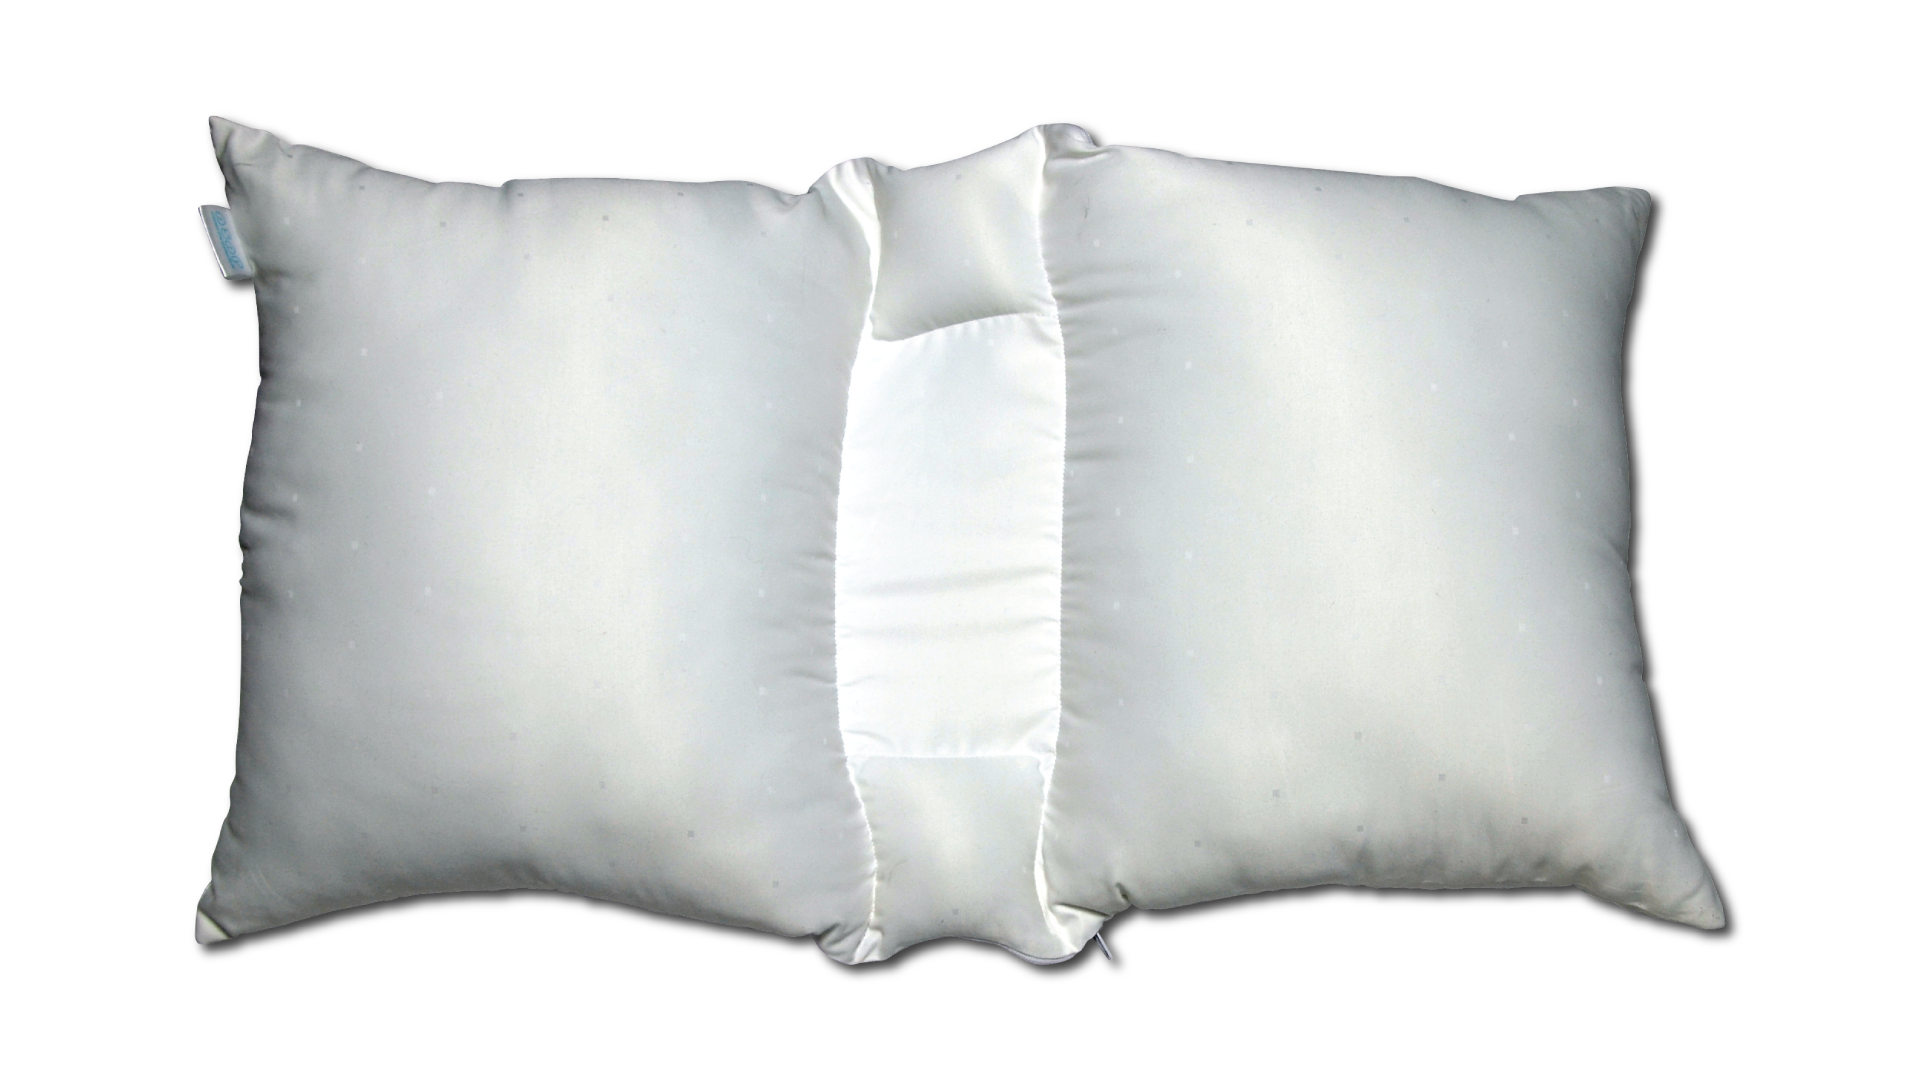 therapeutica spinal alignment sleeping pillow